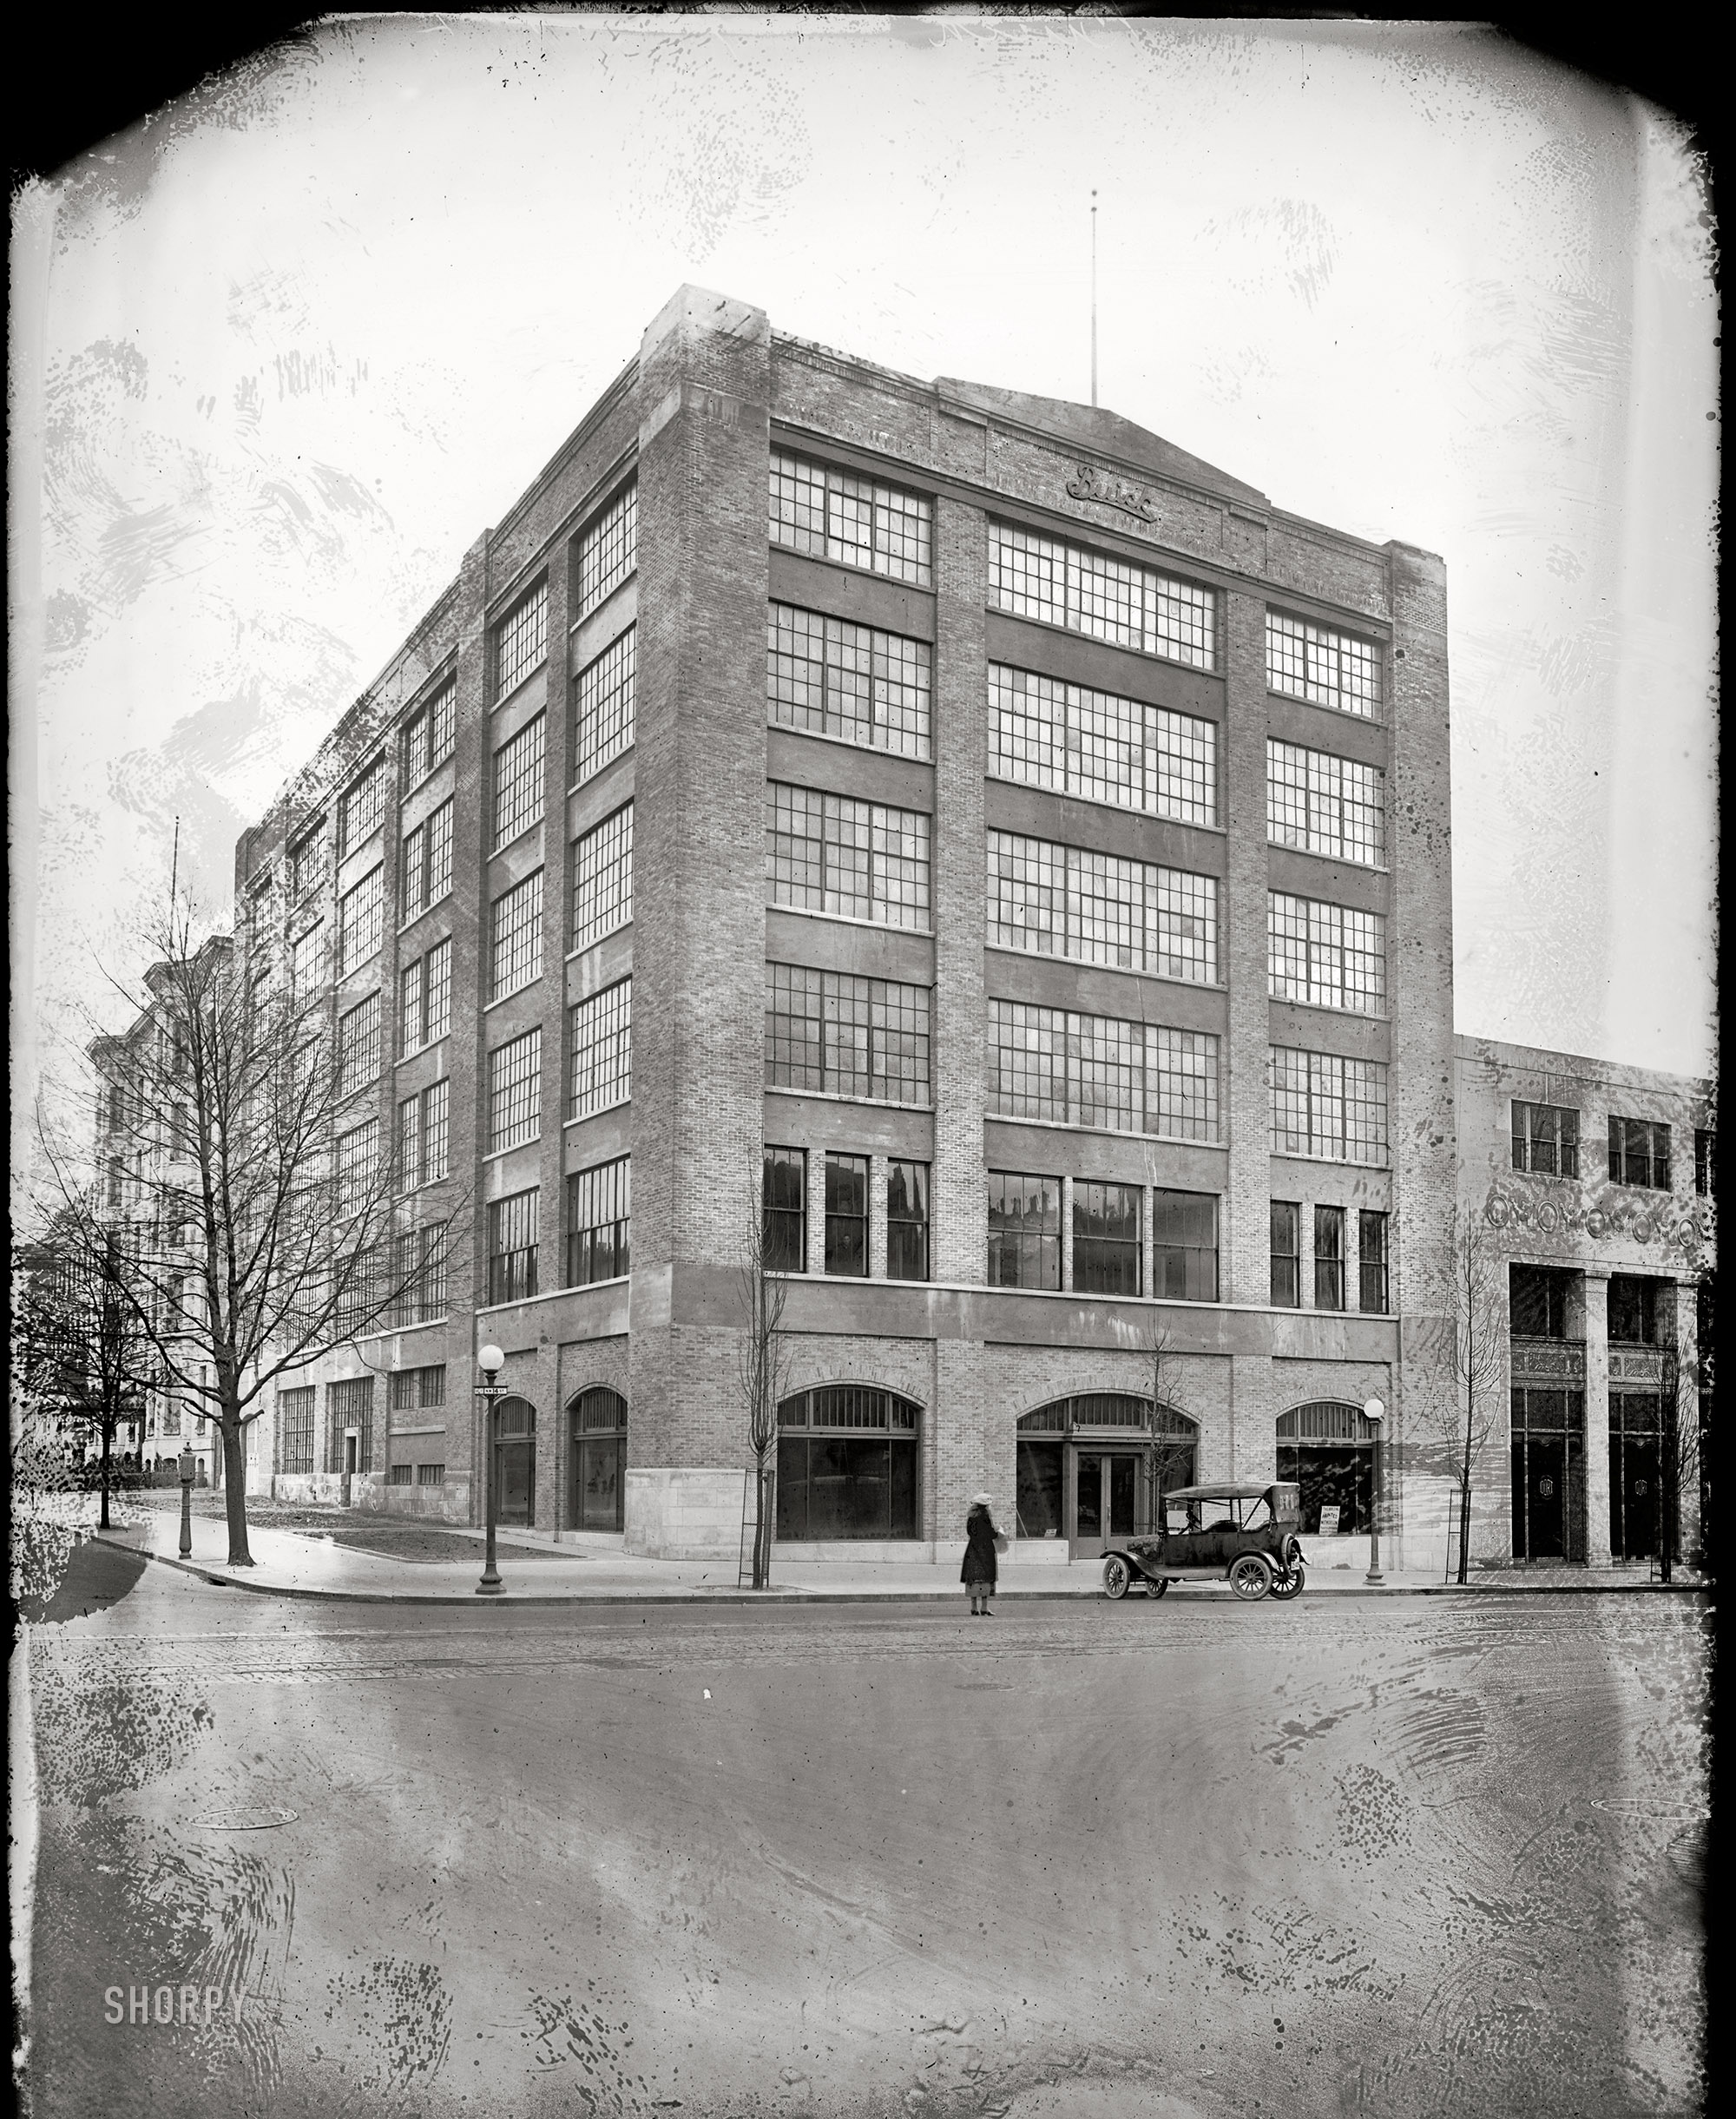 Washington, D.C., circa 1921. "Buick Building, Fourteenth and L Sts. N.W." 8x6 inch glass negative, National Photo Company Collection. View full size.

New Buick Plant Here
&nbsp; &nbsp; &nbsp; &nbsp; Factory branch, Buick Motor Company's new assembling plant and office building, will be erected on site of the Unitarian Church property at Fourteenth and L streets northwest. The property has been leased by the company for ten years at a total rental of over $300,000. (Washington Post, April 18, 1920)
